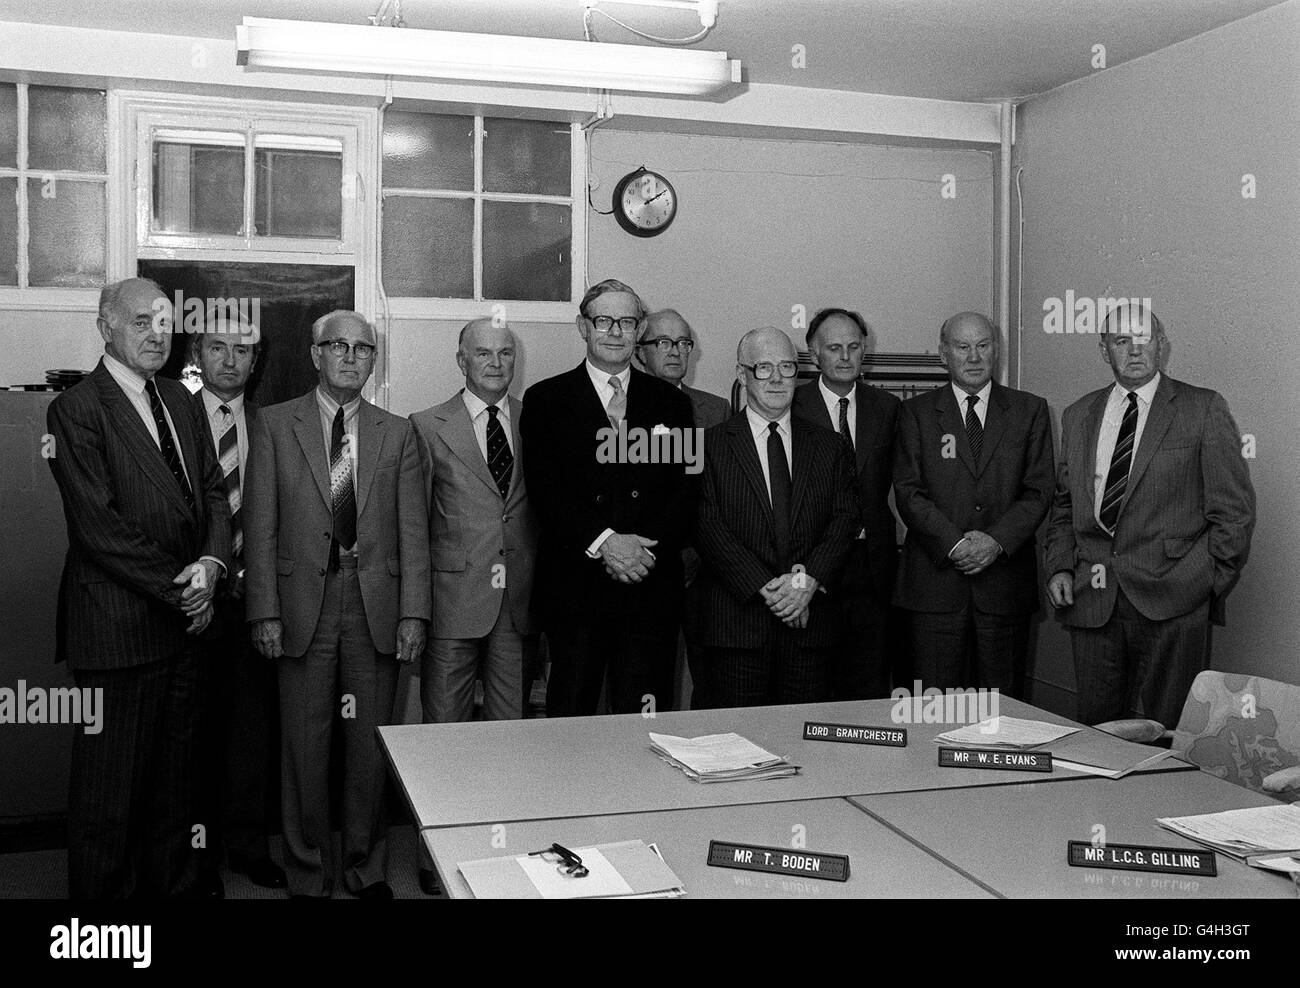 PA NEWS PHOTO 2/8/84 MEMBERS OF THE DAIR QUOTA TRIBUNAL FOR RNGLAND AND WALES AT THE MINISTRY OF AGRICULTURE IN LONDON FOR THEIR MEETING TO LOOK INTO EEC FARMERS MILK PRODUCTION CUTBACKS. LEFT TO RIGHT: K. ALLRIGHT, J. BENNETT, PROFESSOR V BEYNON, T. BODEN, TRIBUNAL CHAIRMAN LORD GRANTCHESTER, L. GILLING, W. EVANS, J. LETHBRIDGE, L. NORTHEN AND H. READE Stock Photo